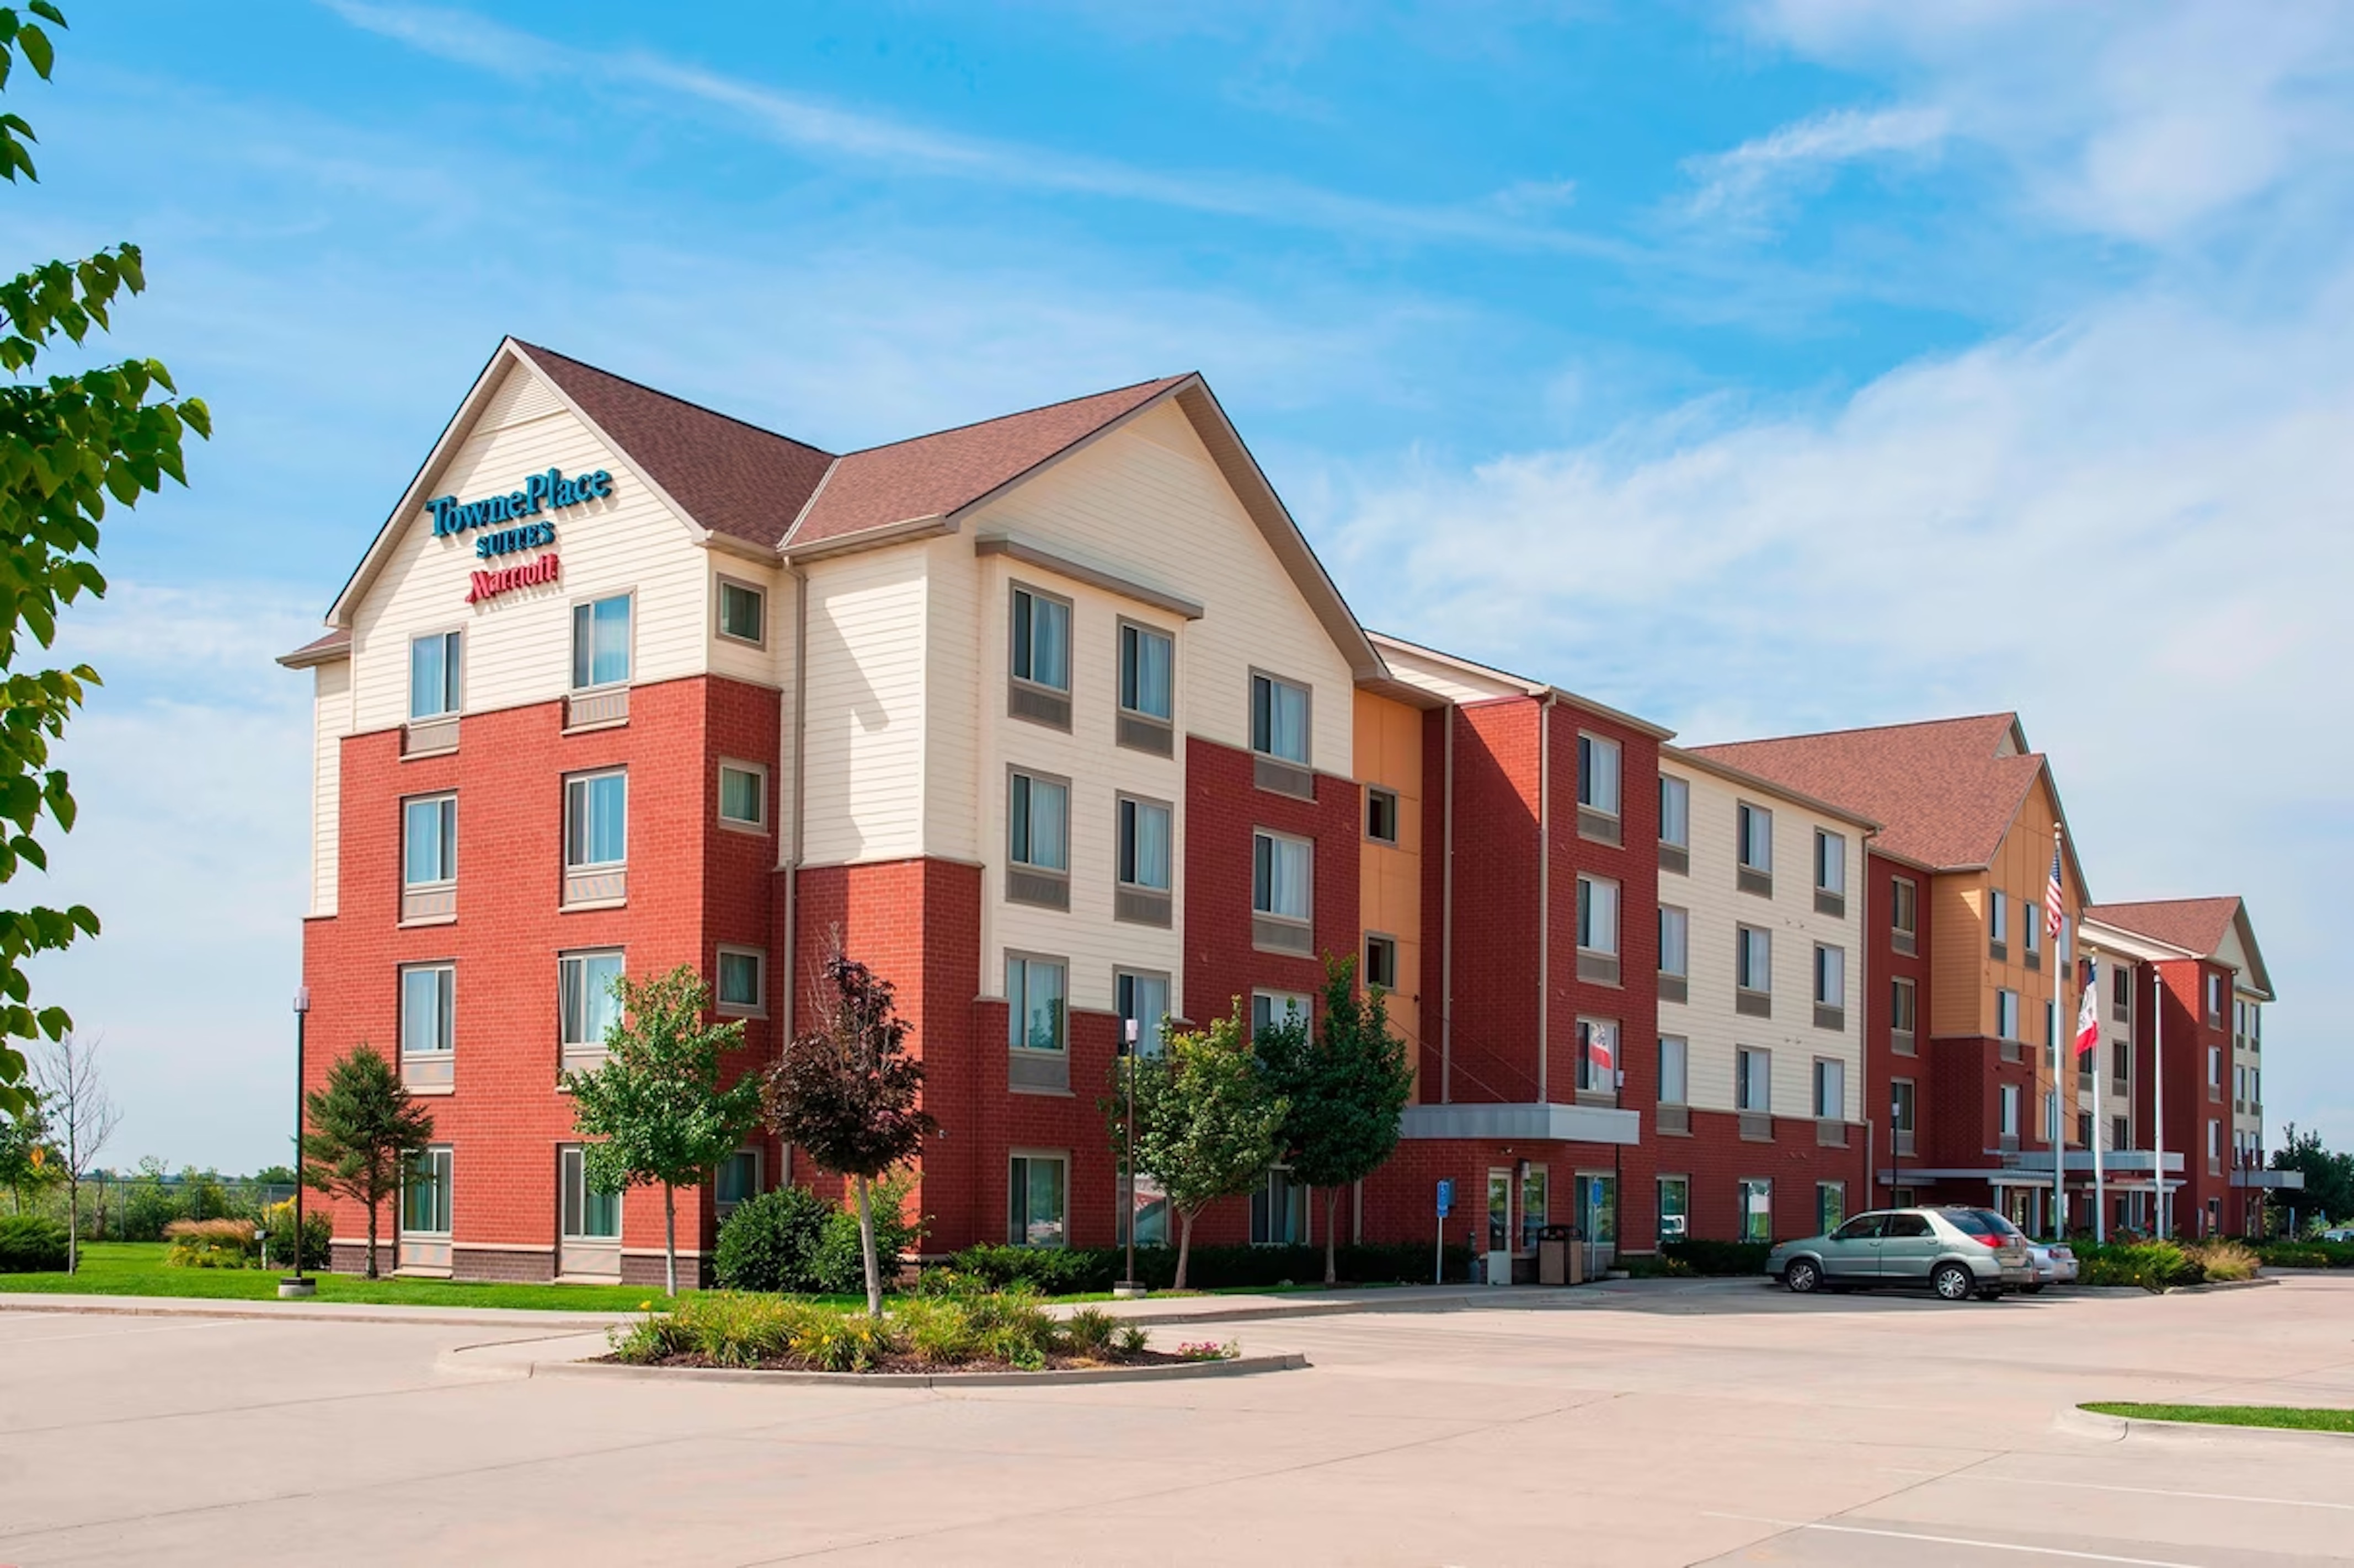 Photo of TownePlace Suites Des Moines Urbandale, Johnston, IA